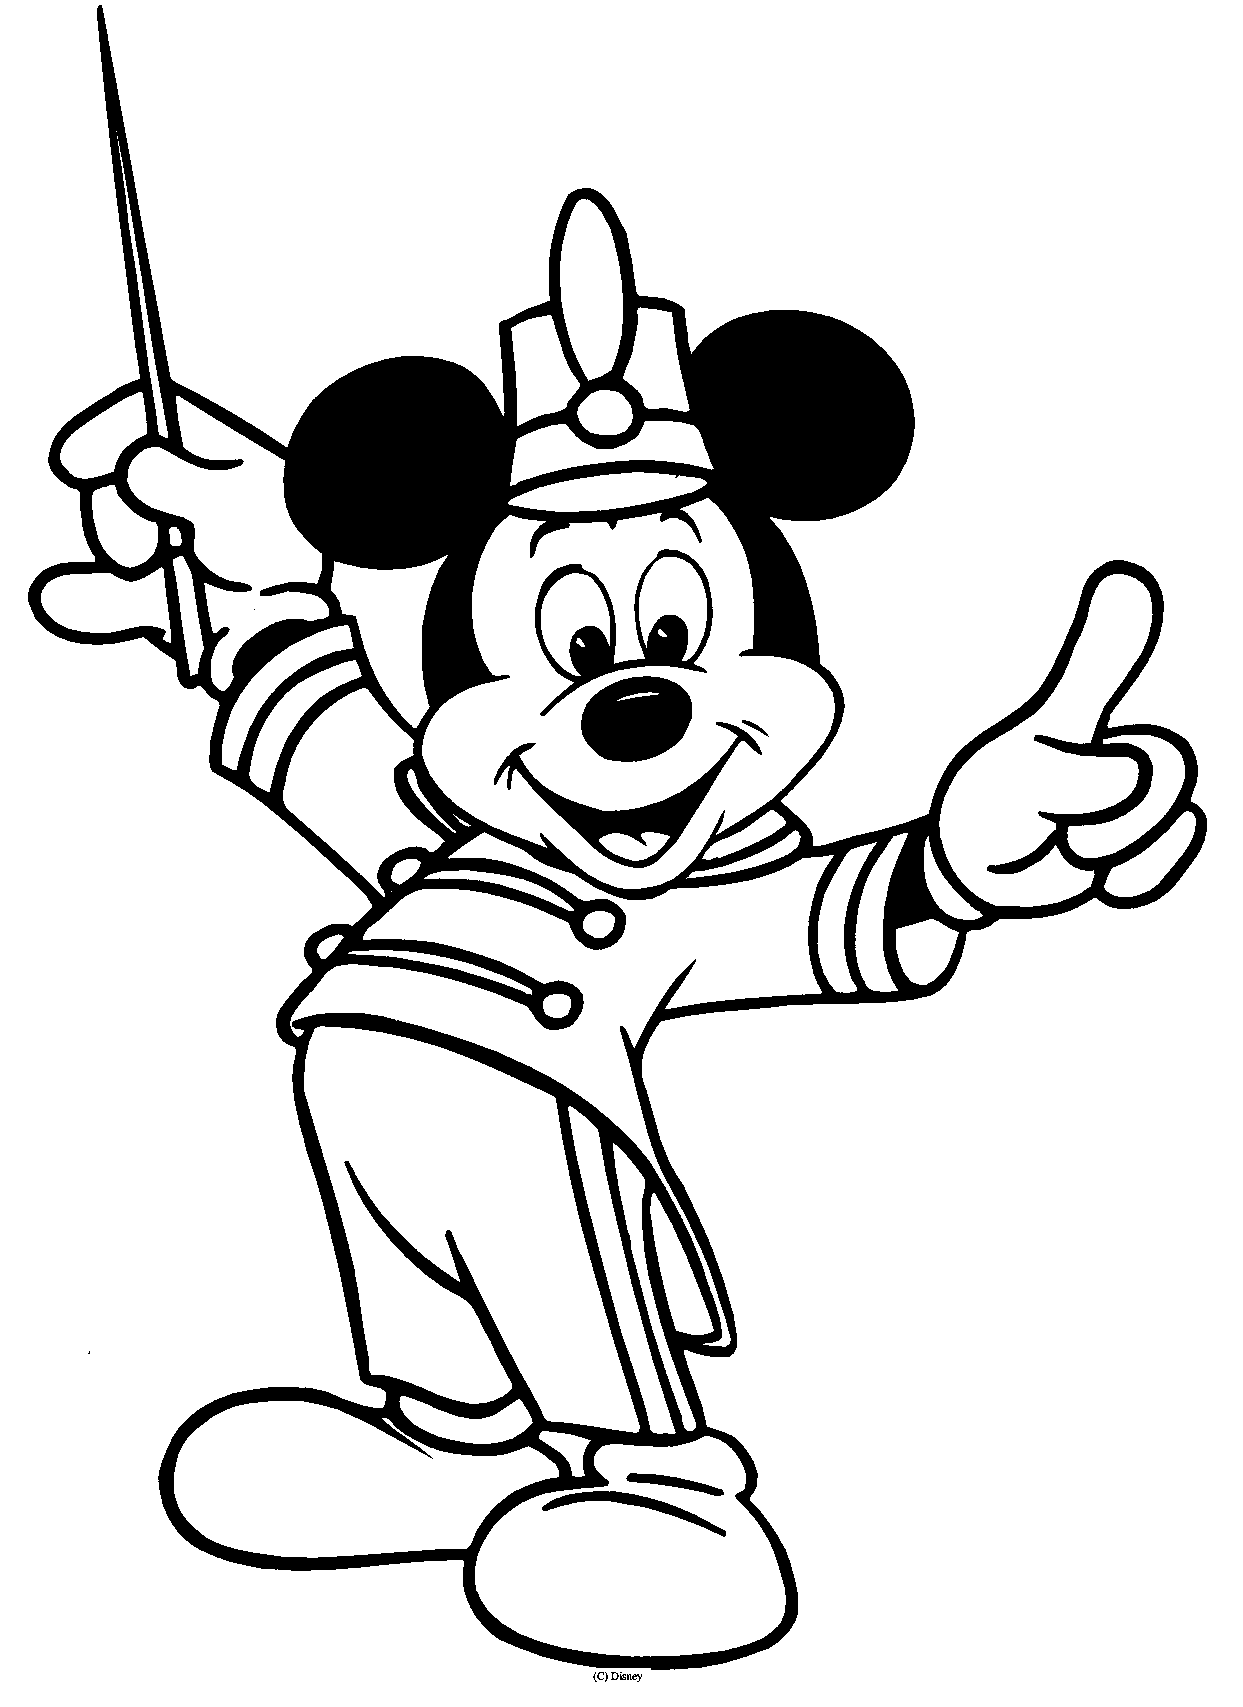 Black and white clipart of mickey mouse in a car